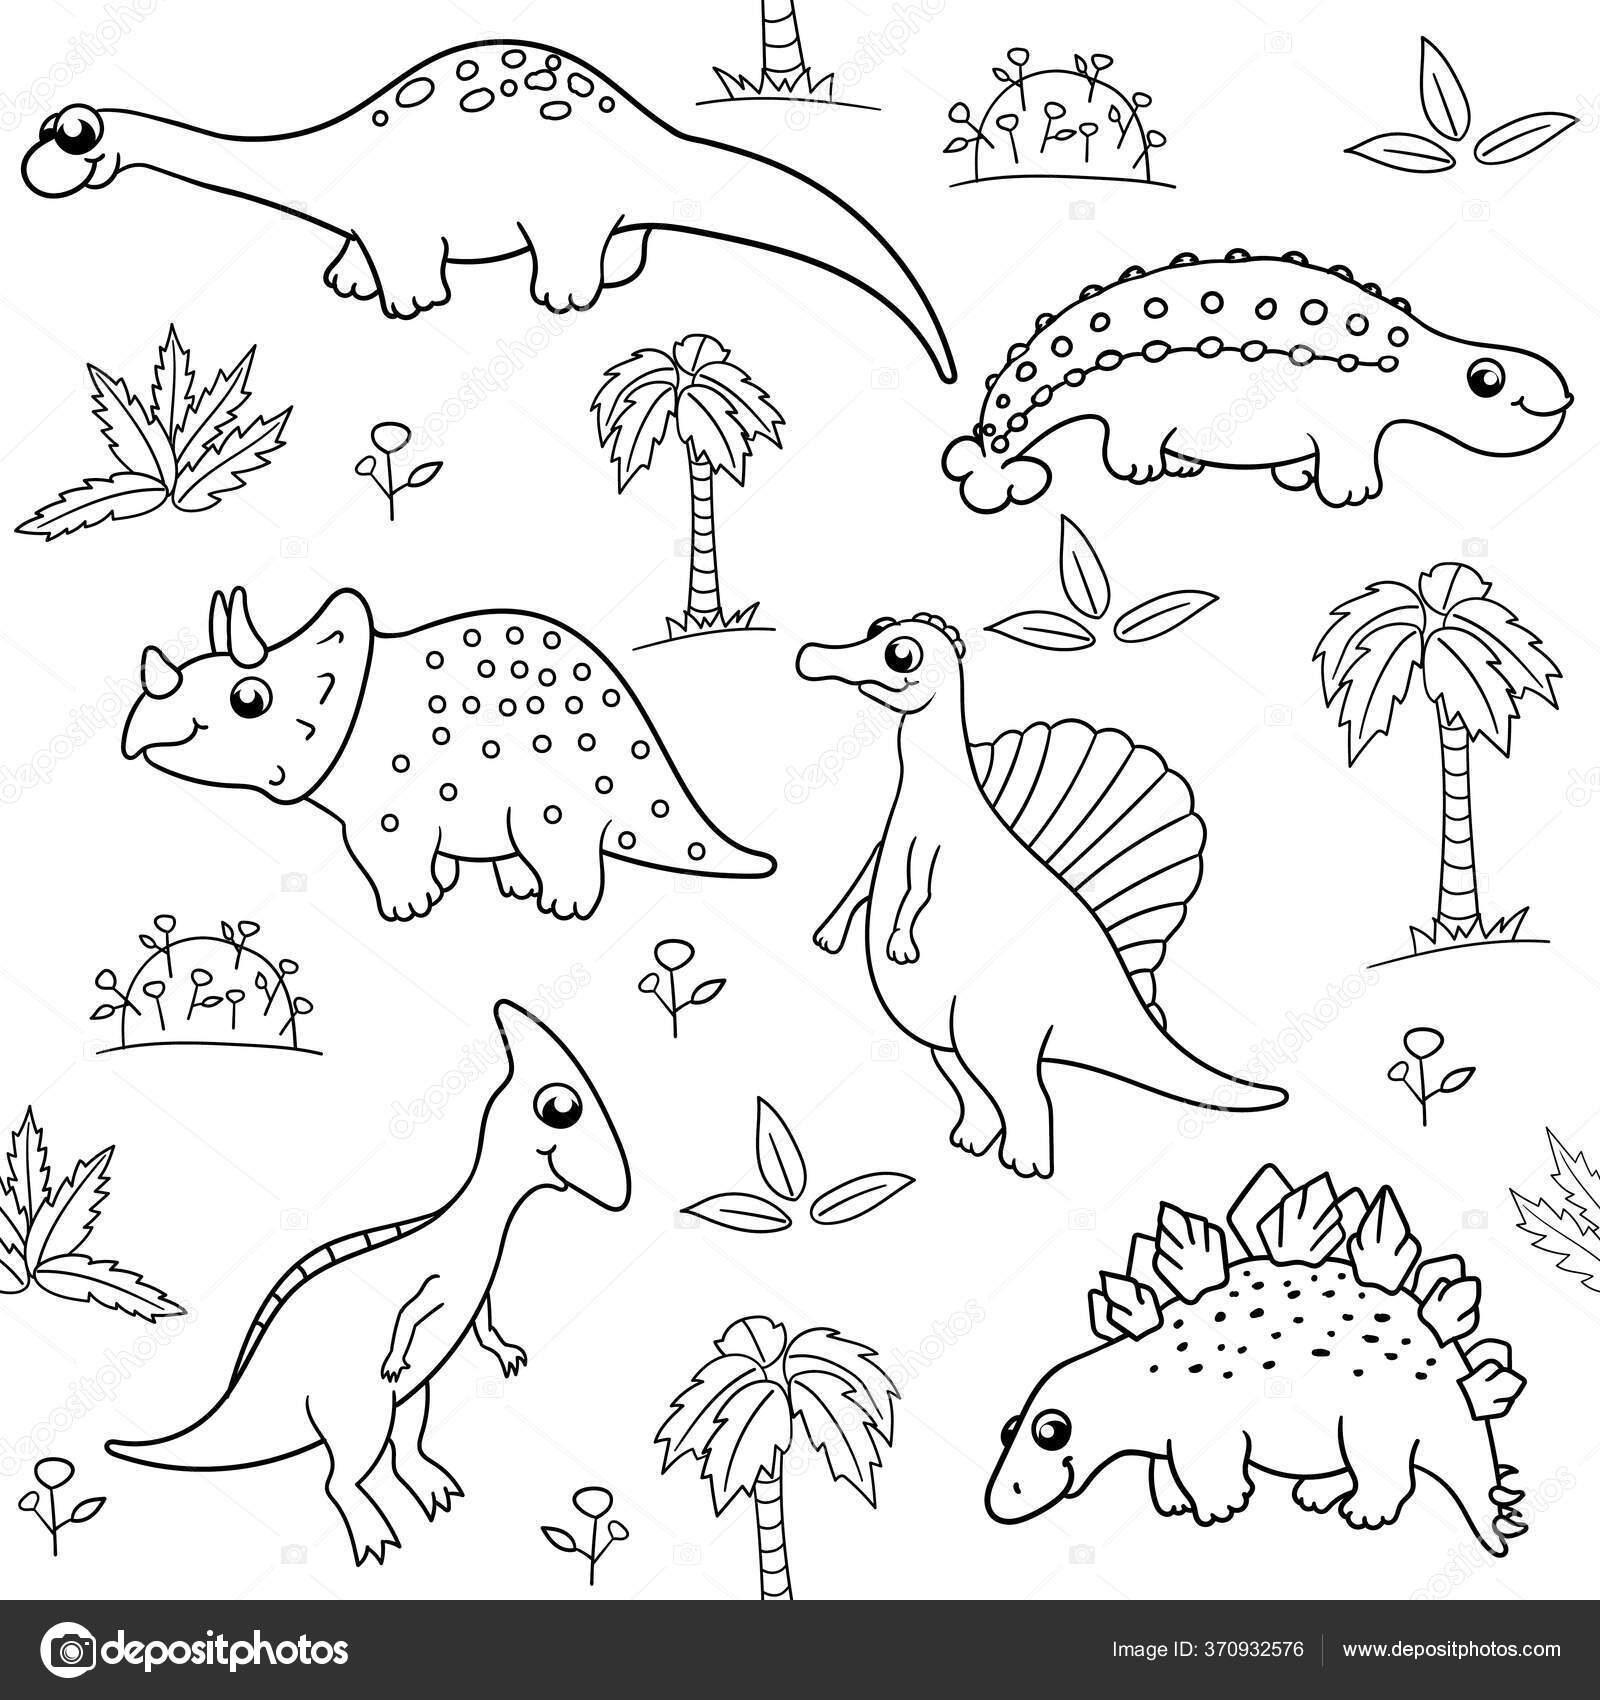 Seamless vector pattern in black and white on a white background